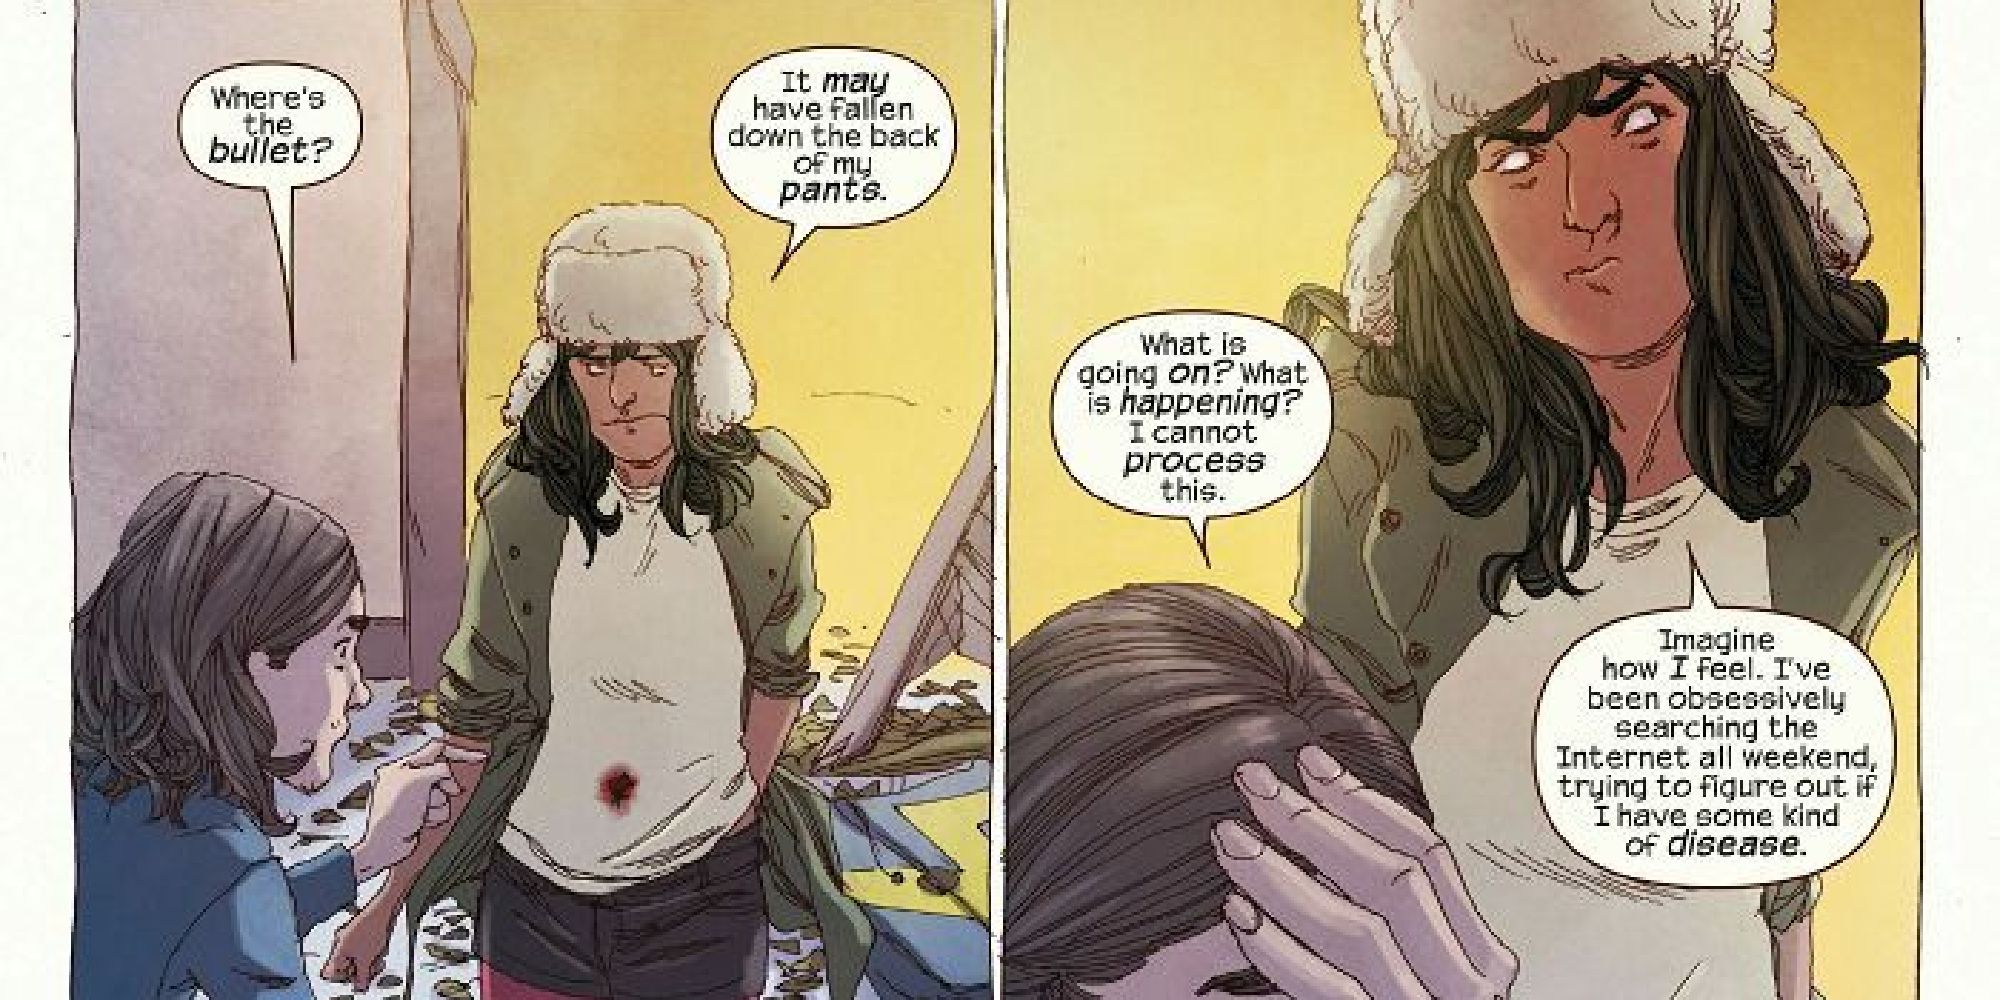 Bruno helping Kamala cure a bullet wound in the comics